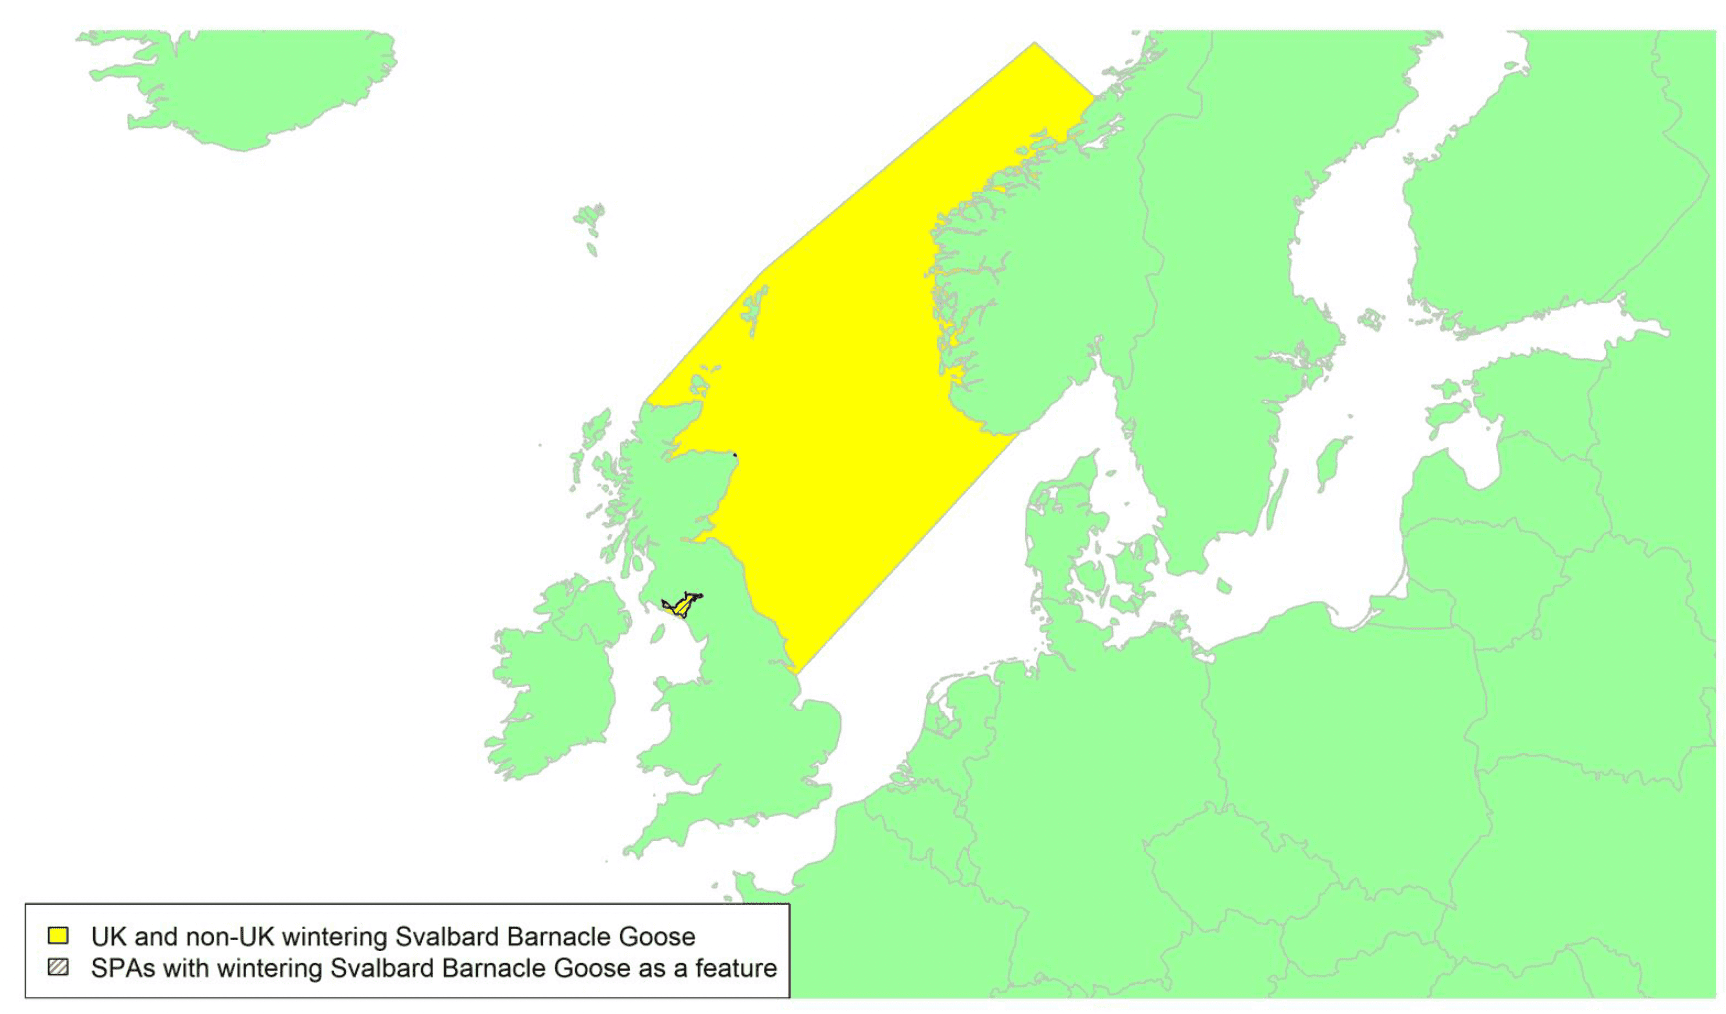 Map of North West Europe showing migratory routes and SPAs within the UK for Svalbard Barnacle Geese as described in the text below.